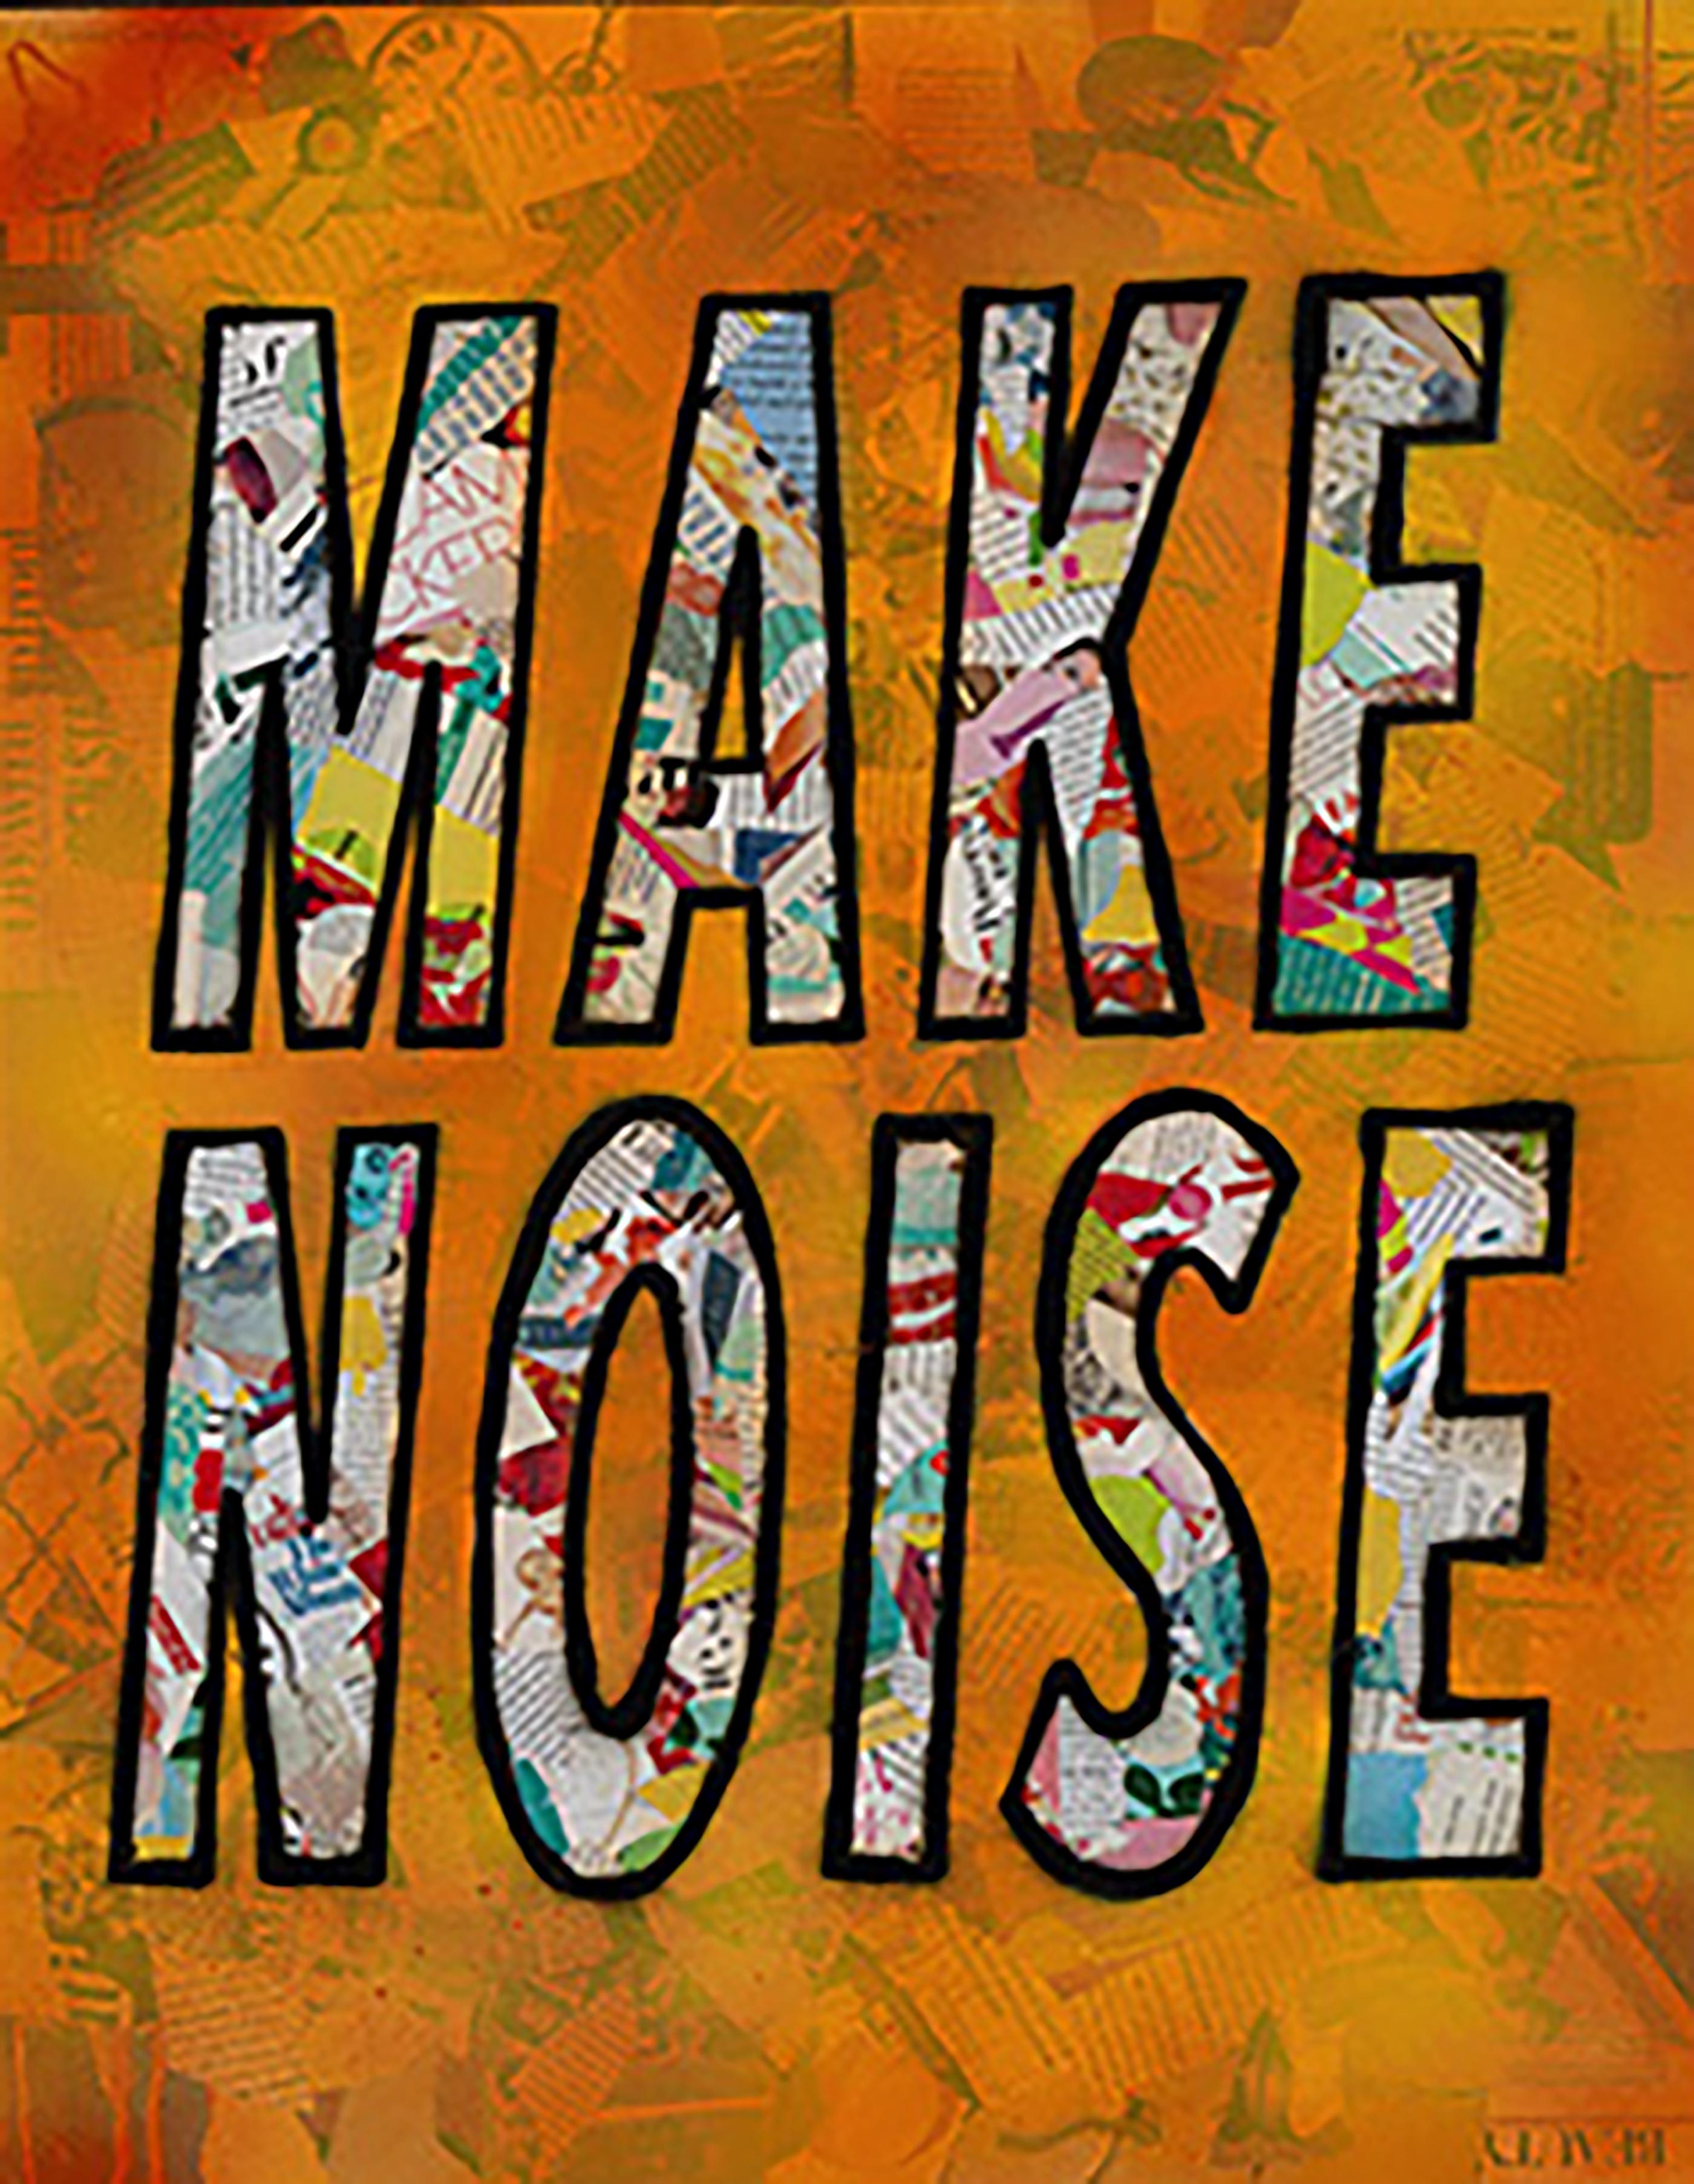 "Make Noise"-Magazine Collage, Acrylic & Spray Paint on Canvas - Mixed Media Art by Amy Smith